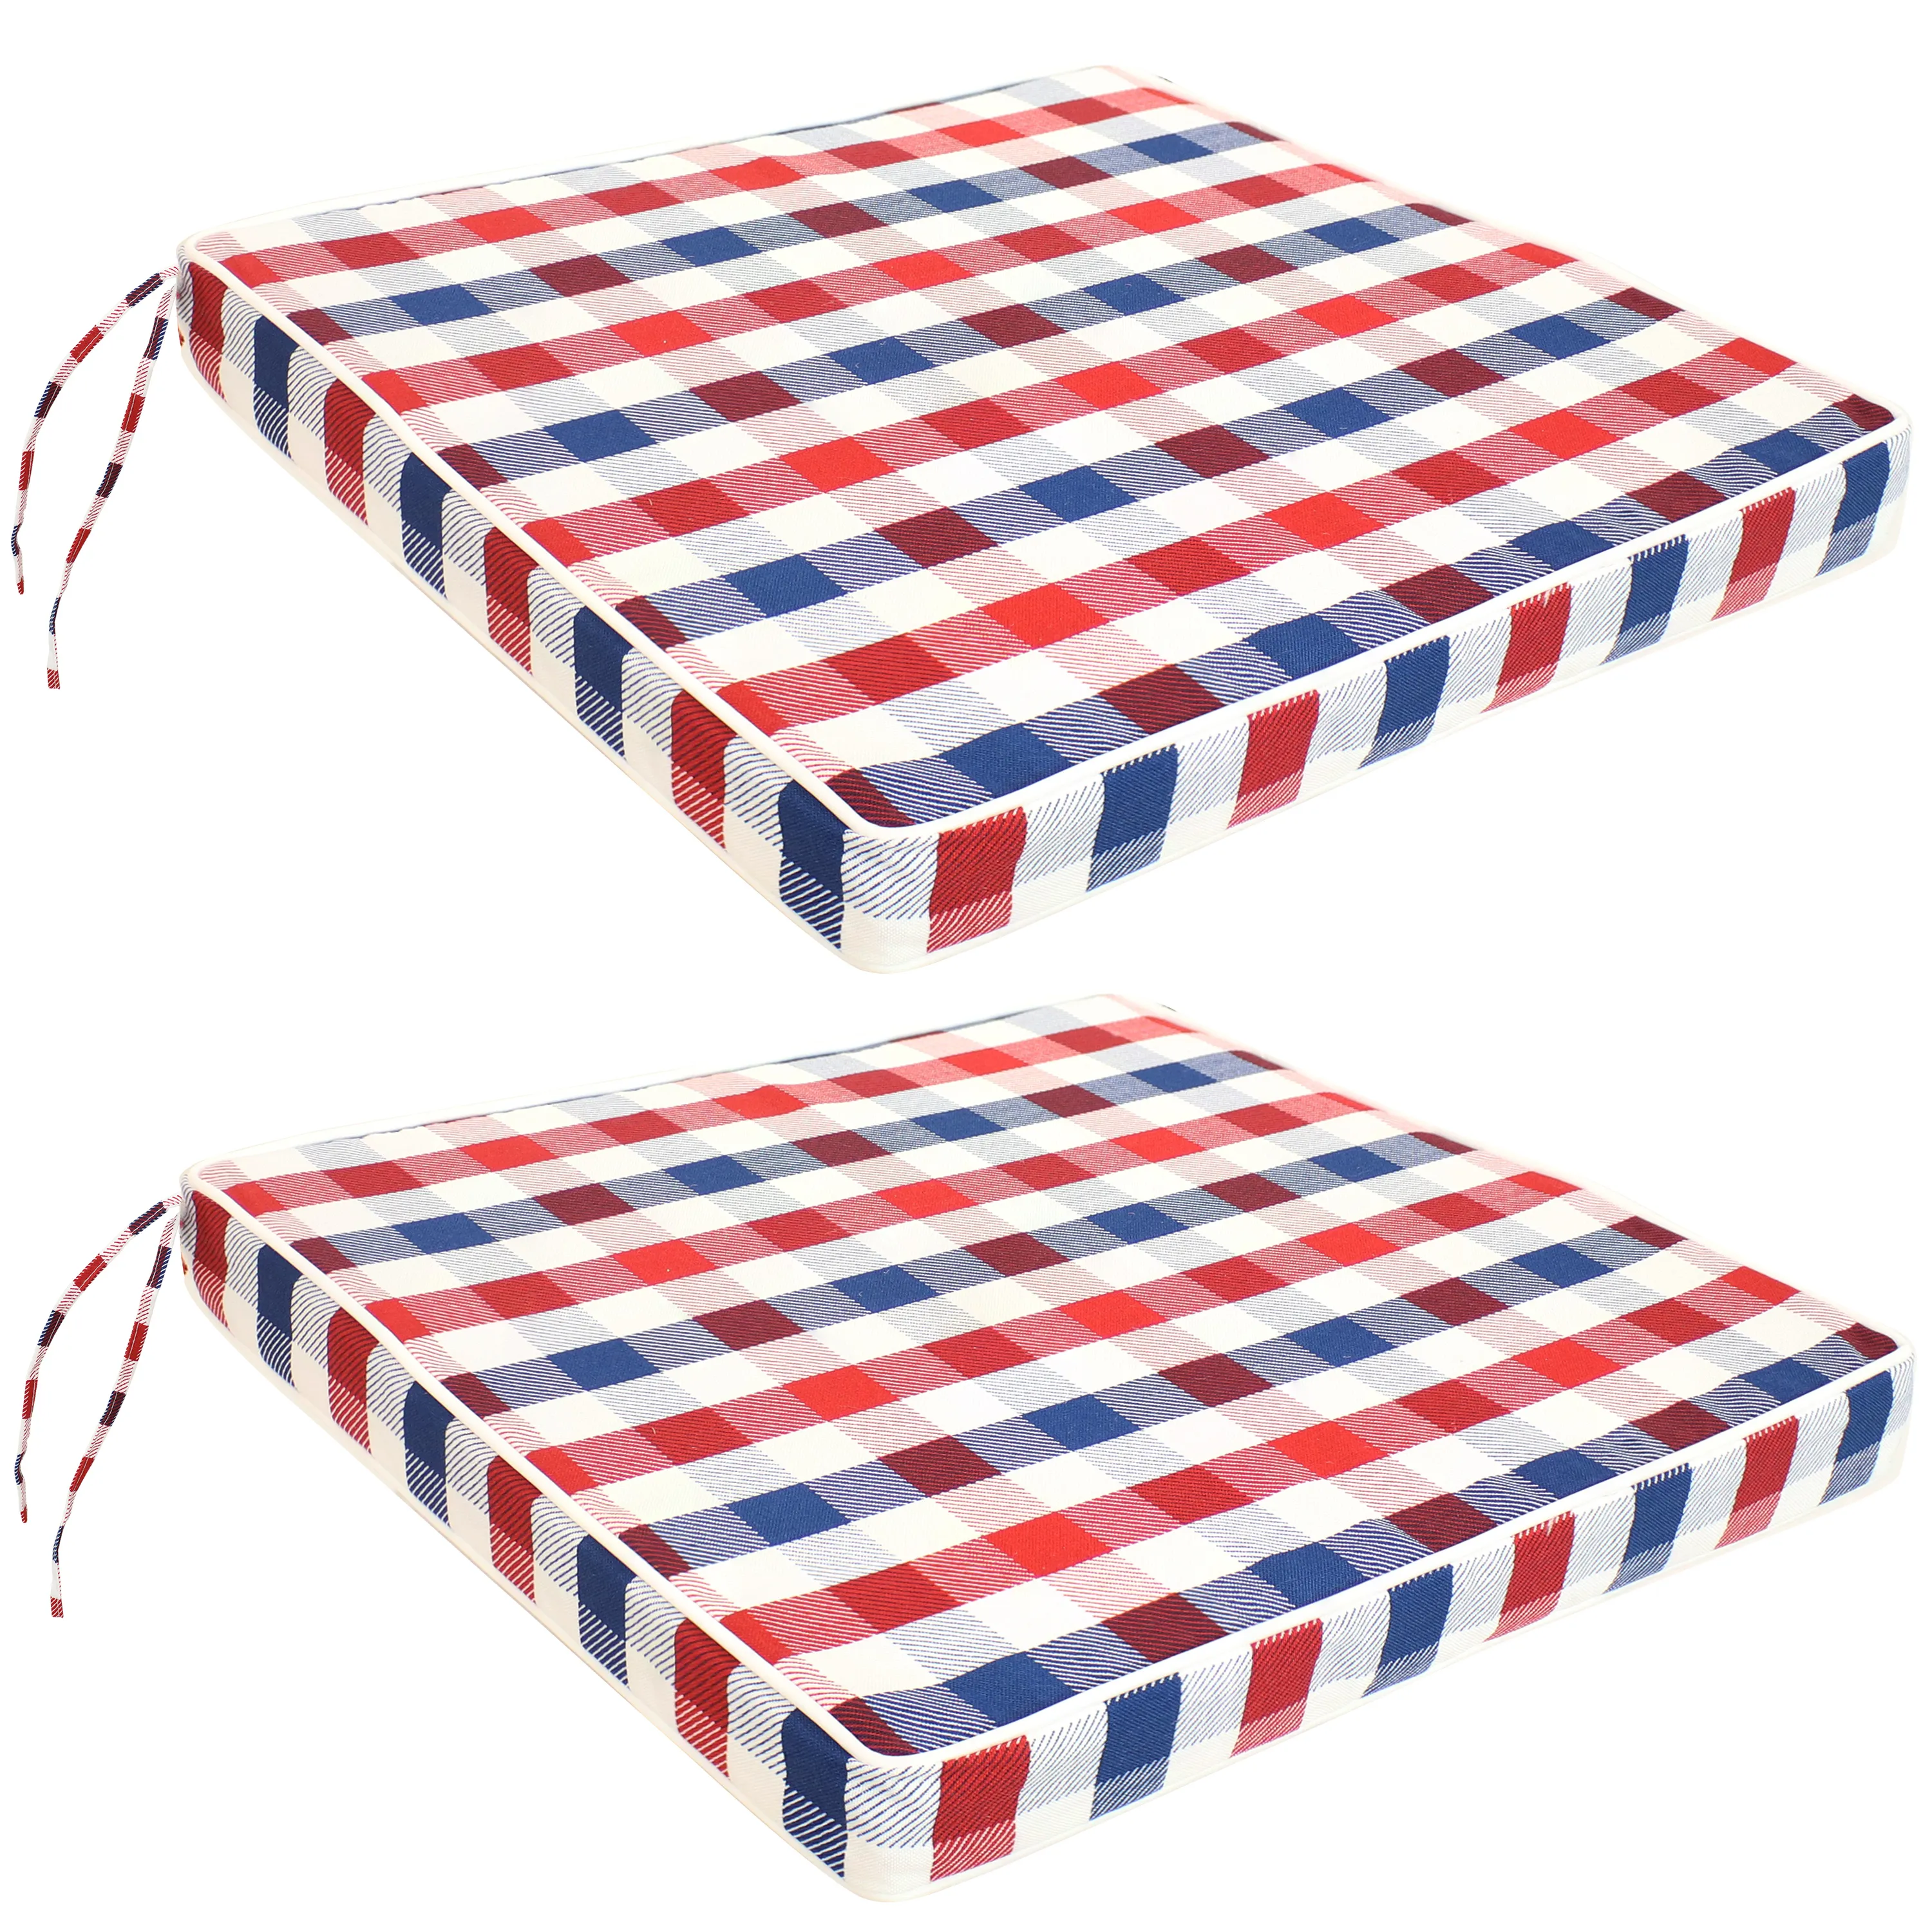 Sunnydaze Set of 2 17" Square Seat Cushions with Ties